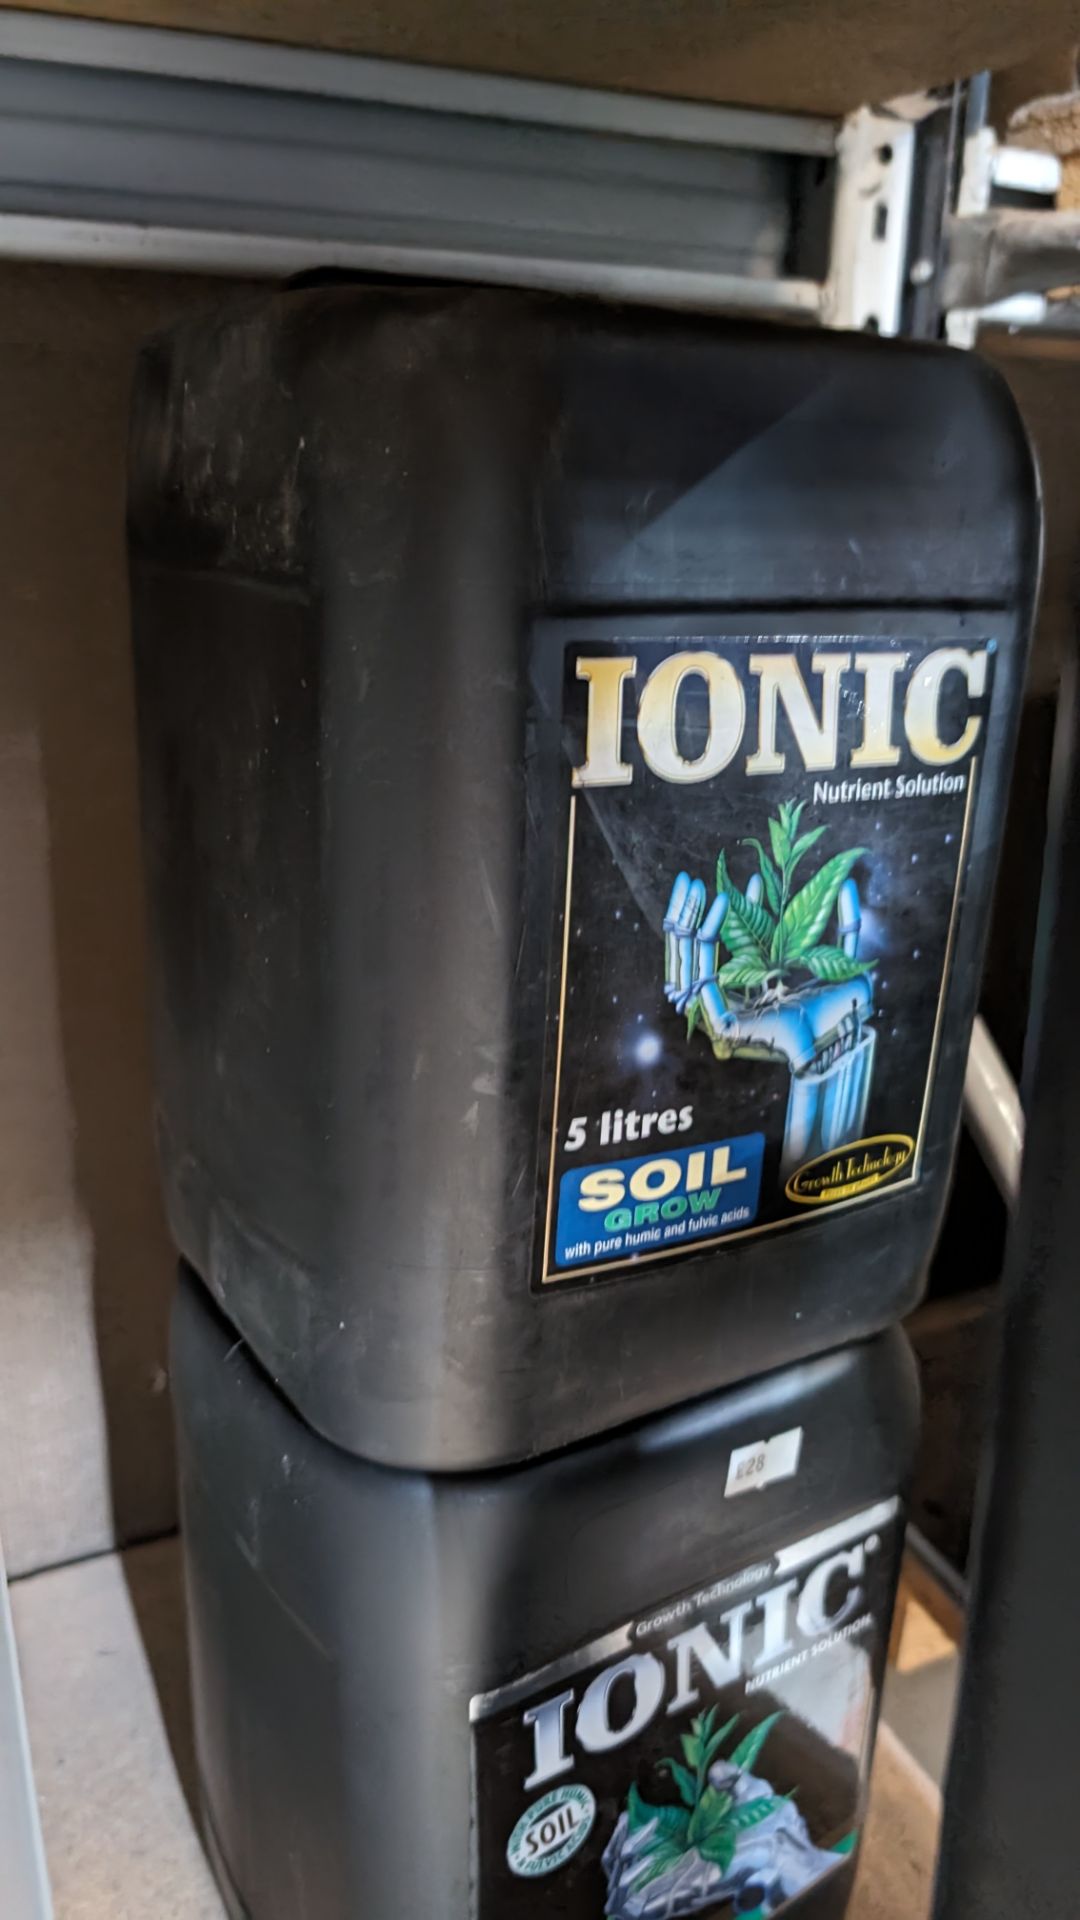 4 off 5 litre bottles of ionic soil grow nutrient solution - Image 5 of 5